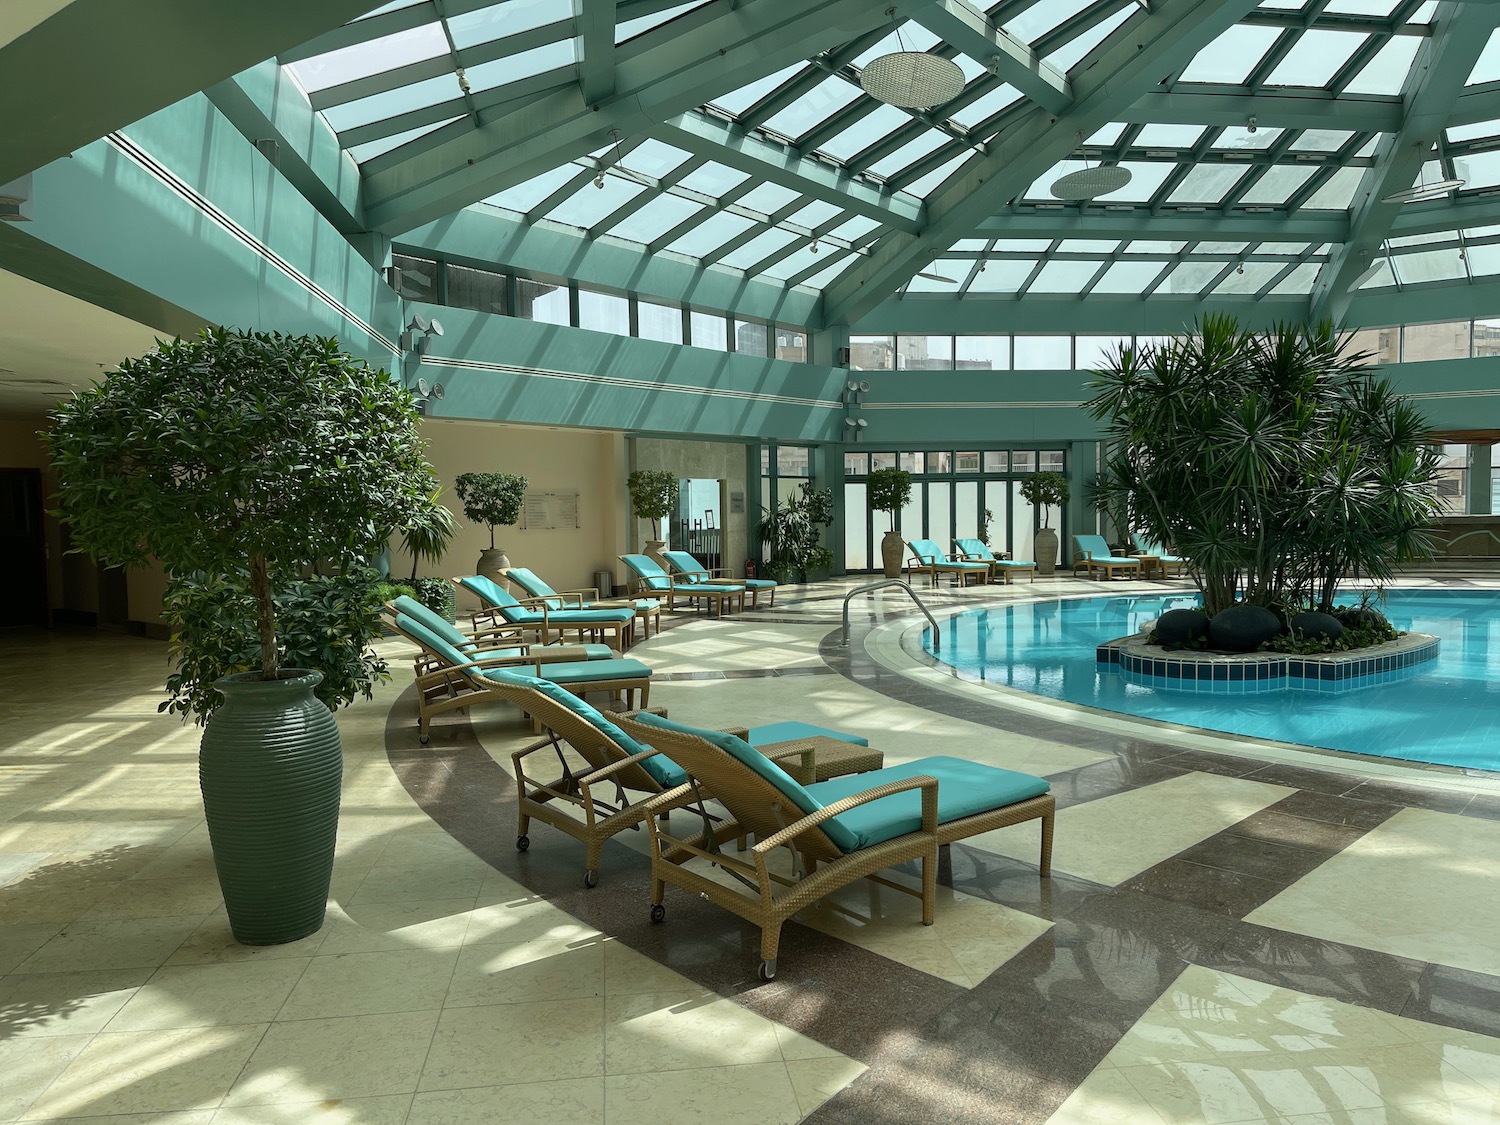 a pool with chairs and trees in a room